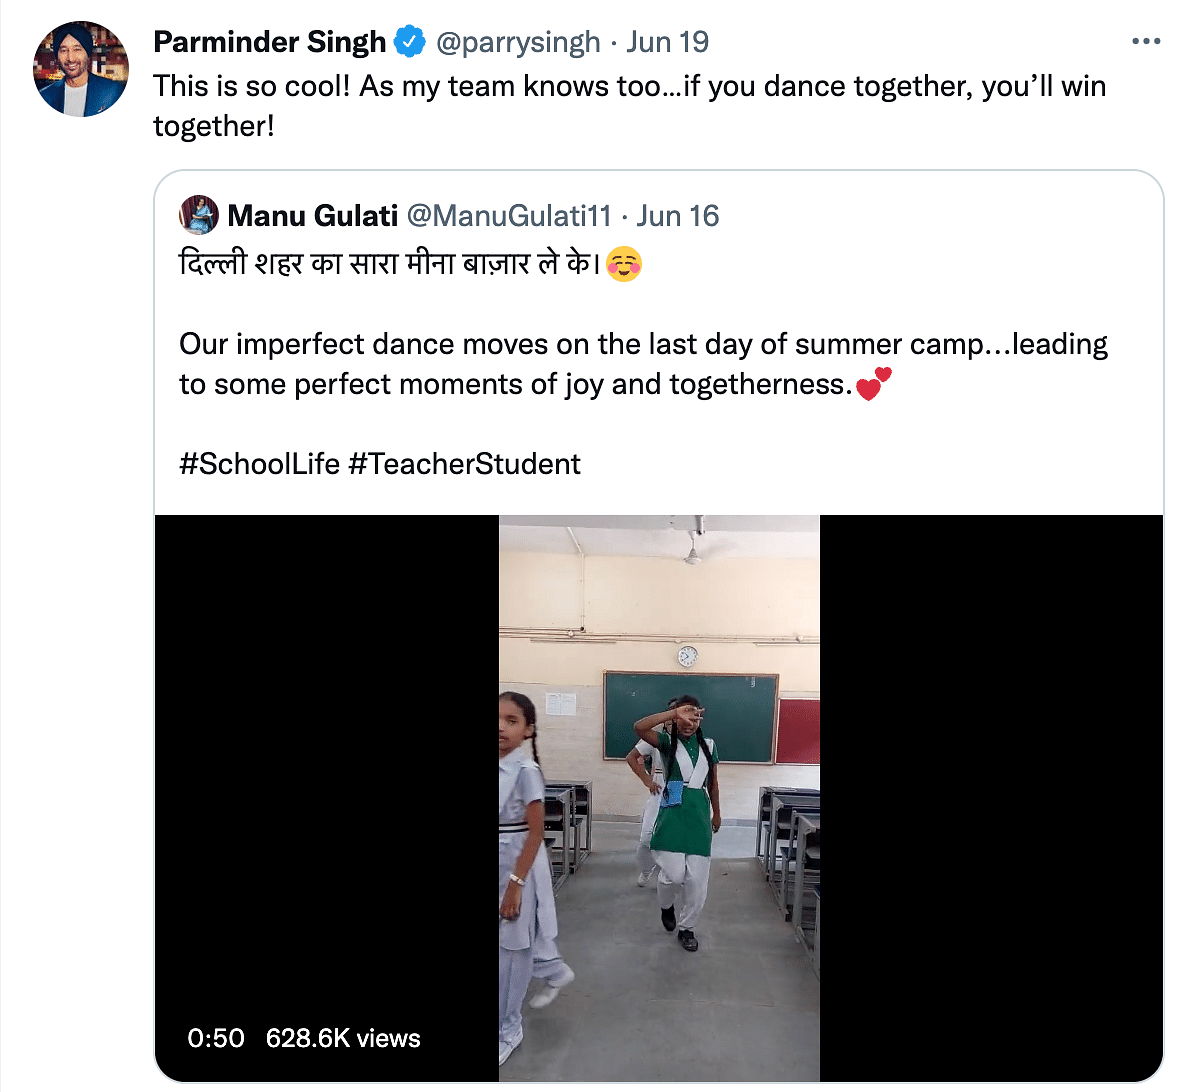 Manu Gulati, a teacher from a government school in Delhi, went viral for dancing with her students.